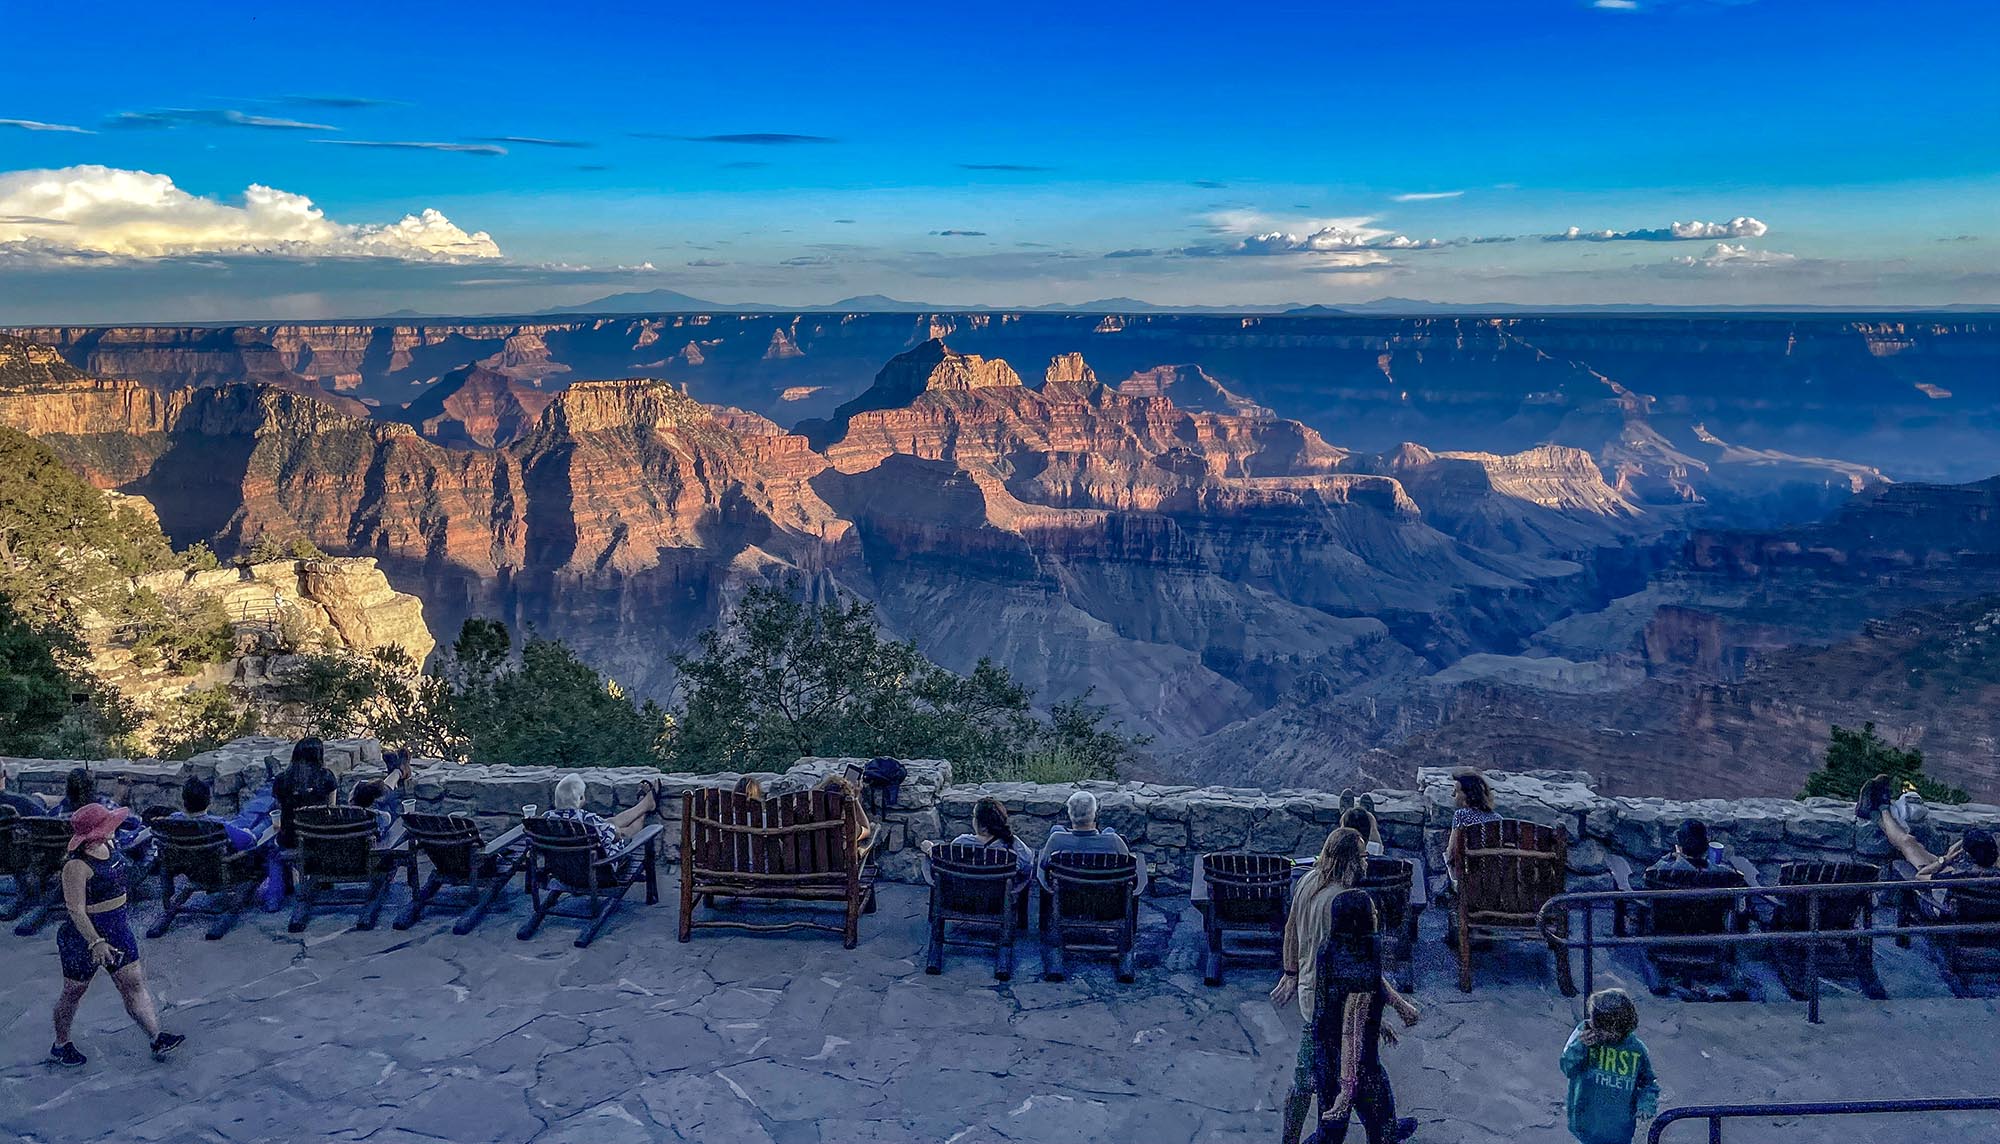 Visitors are seated on chairs on the Grand Canyon Lodge veranda, overlooking the canyon landscape at sunset